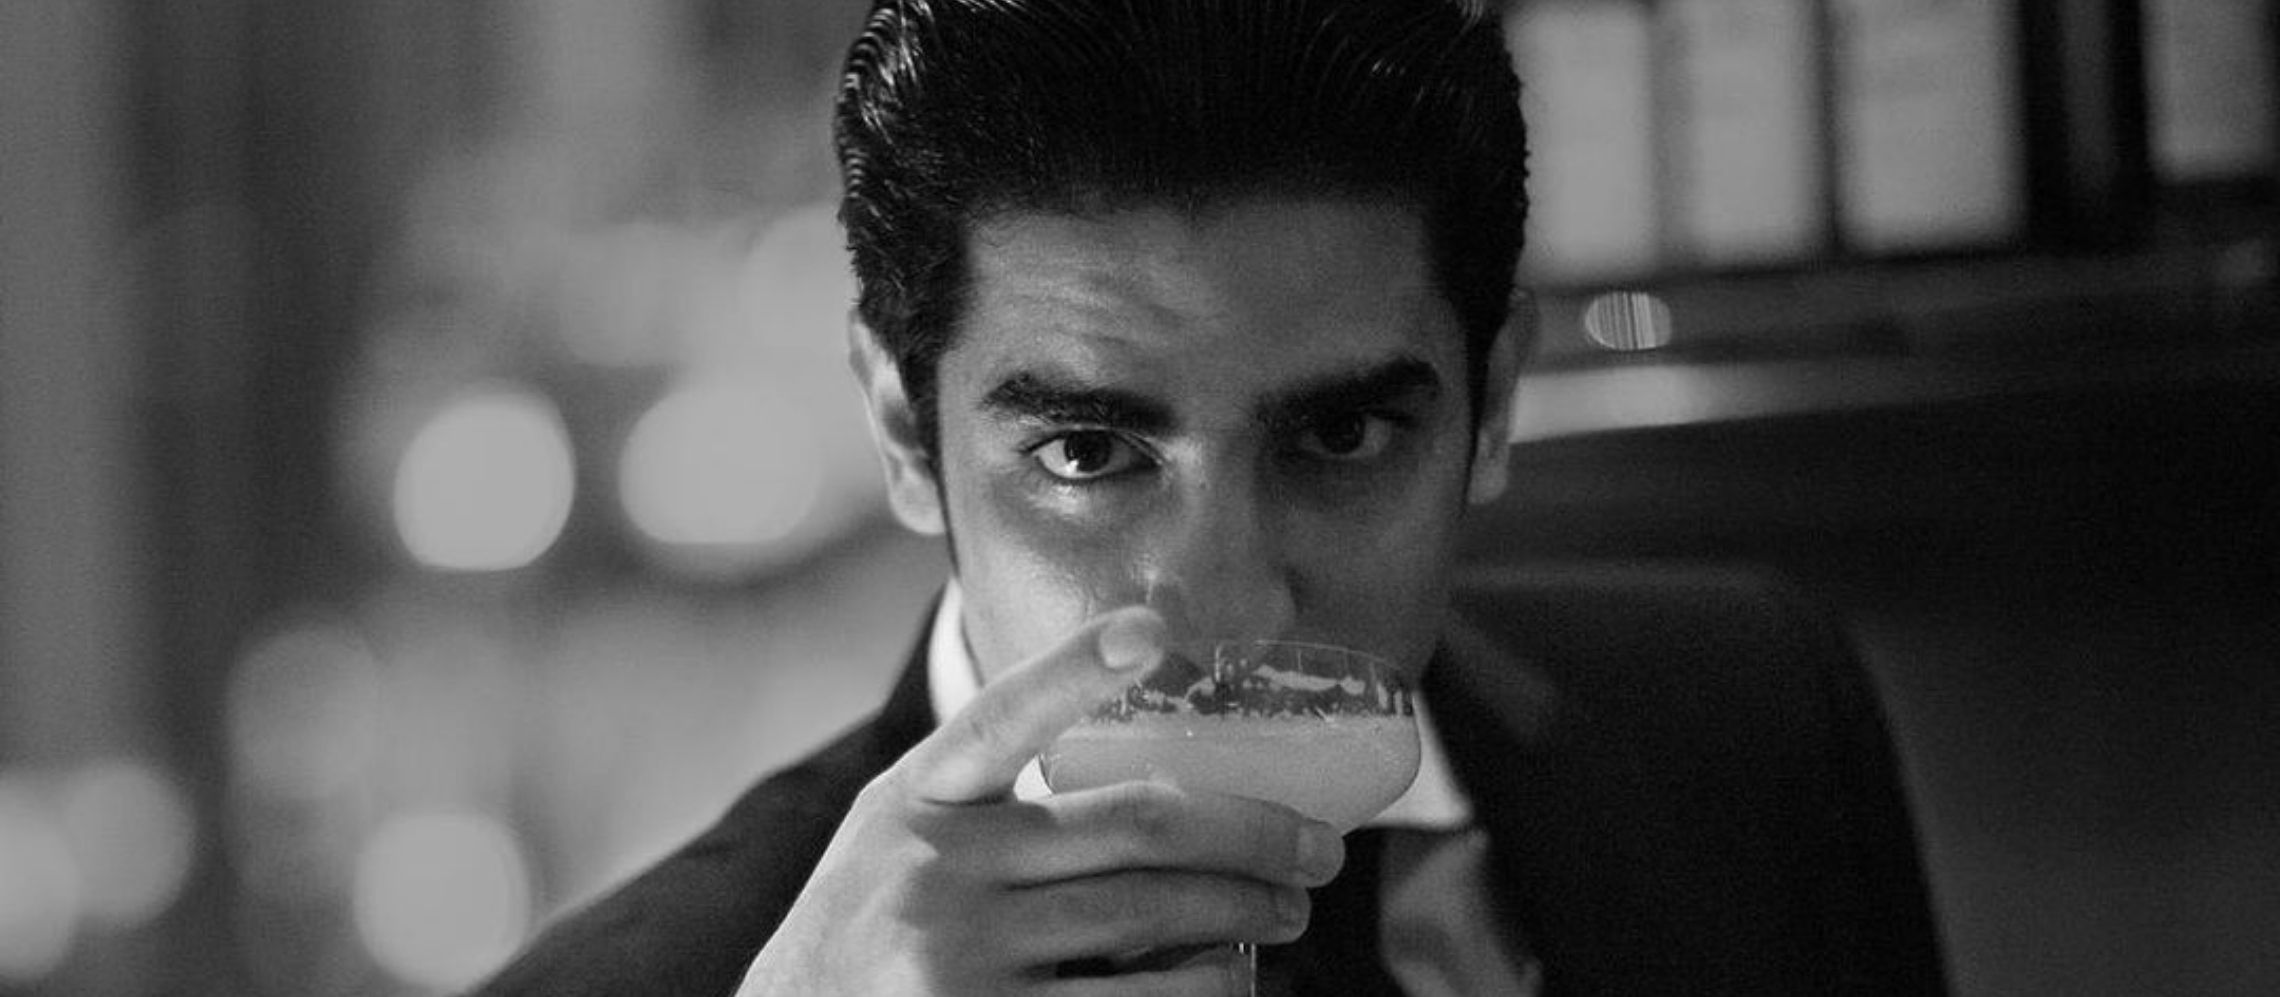 Photo for: The Aubrey’s Devender Sehgal On His Journey From A Mechanic To A Bar Manager